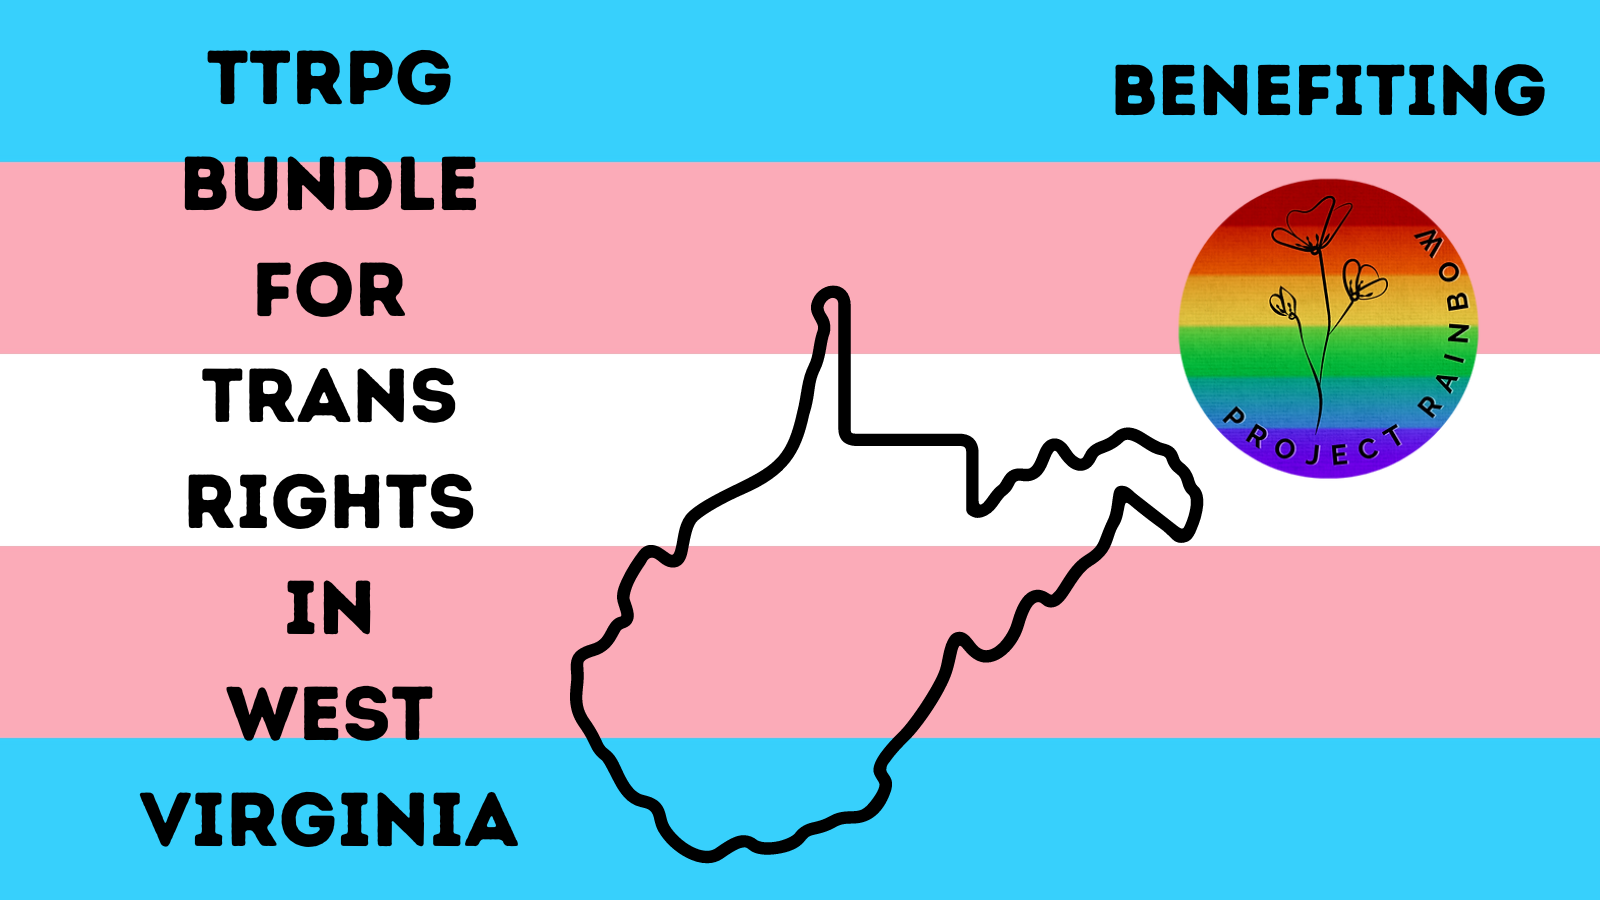 20 Great TTRPGs In The TTRPGs for Trans Rights – West Virginia Bundle